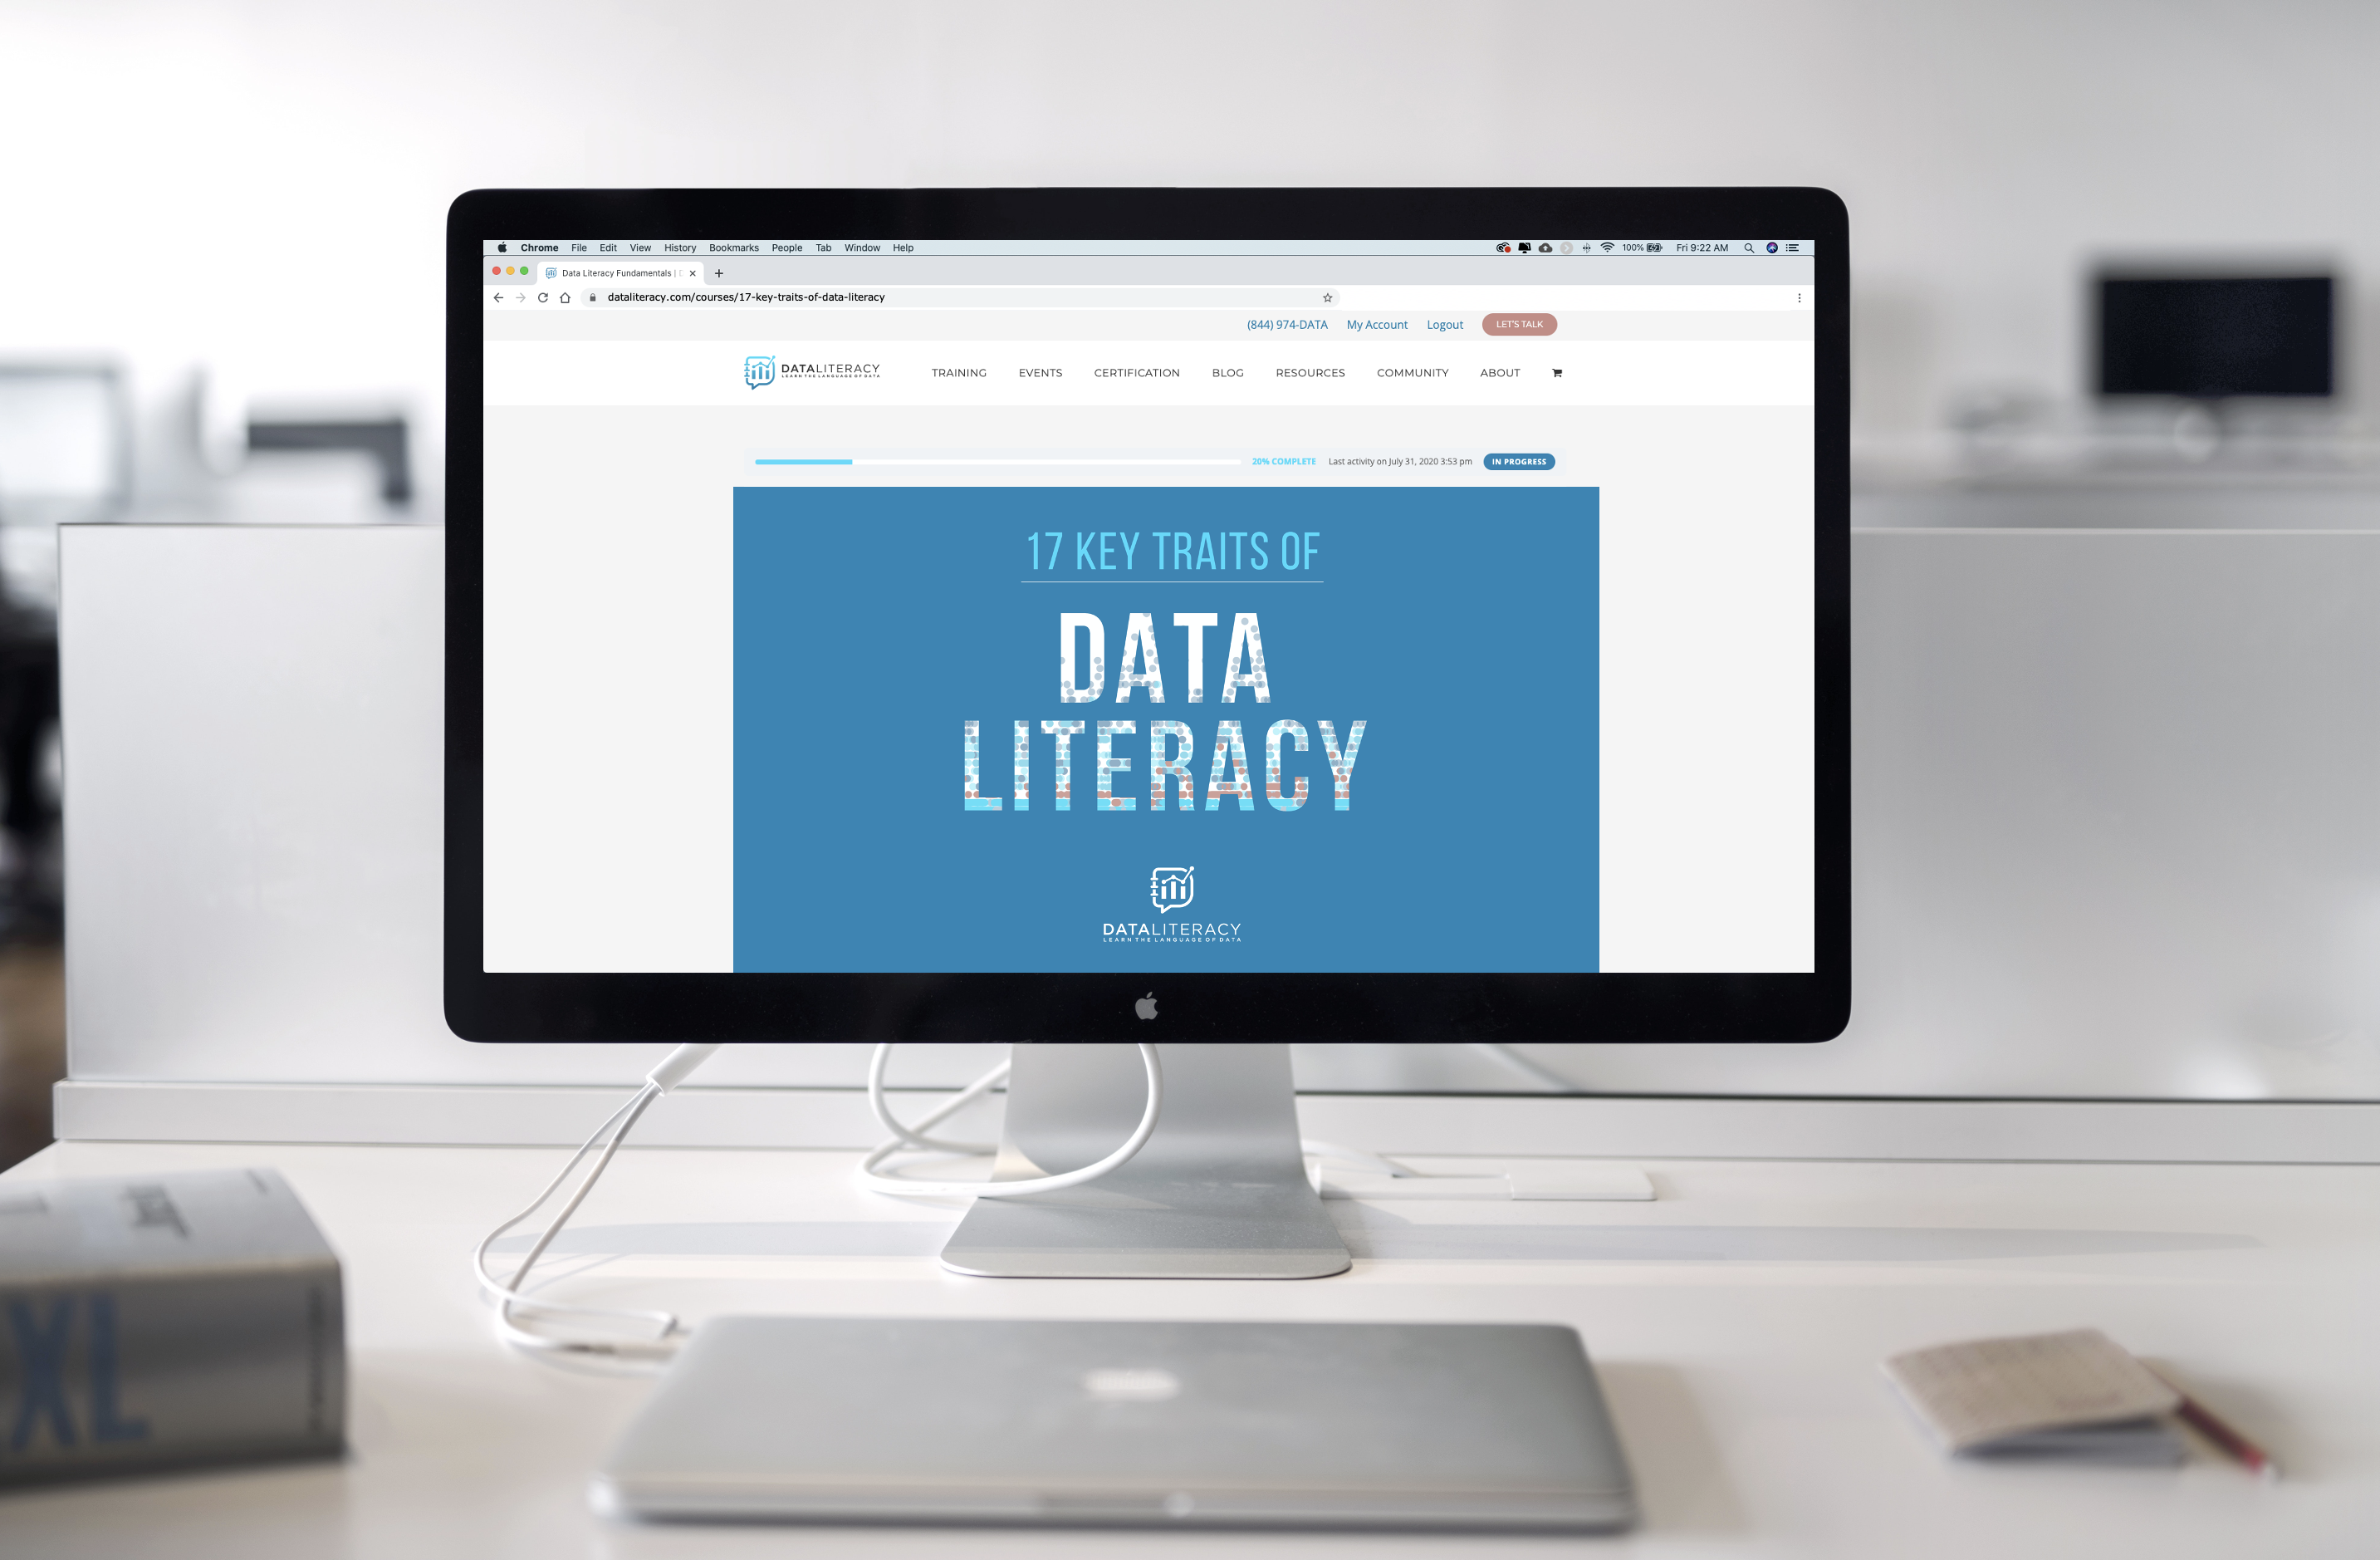 NEW: The ’17 Key Traits of Data Literacy’ Course & Self-Assessment | Data Literacy | Data Literacy  